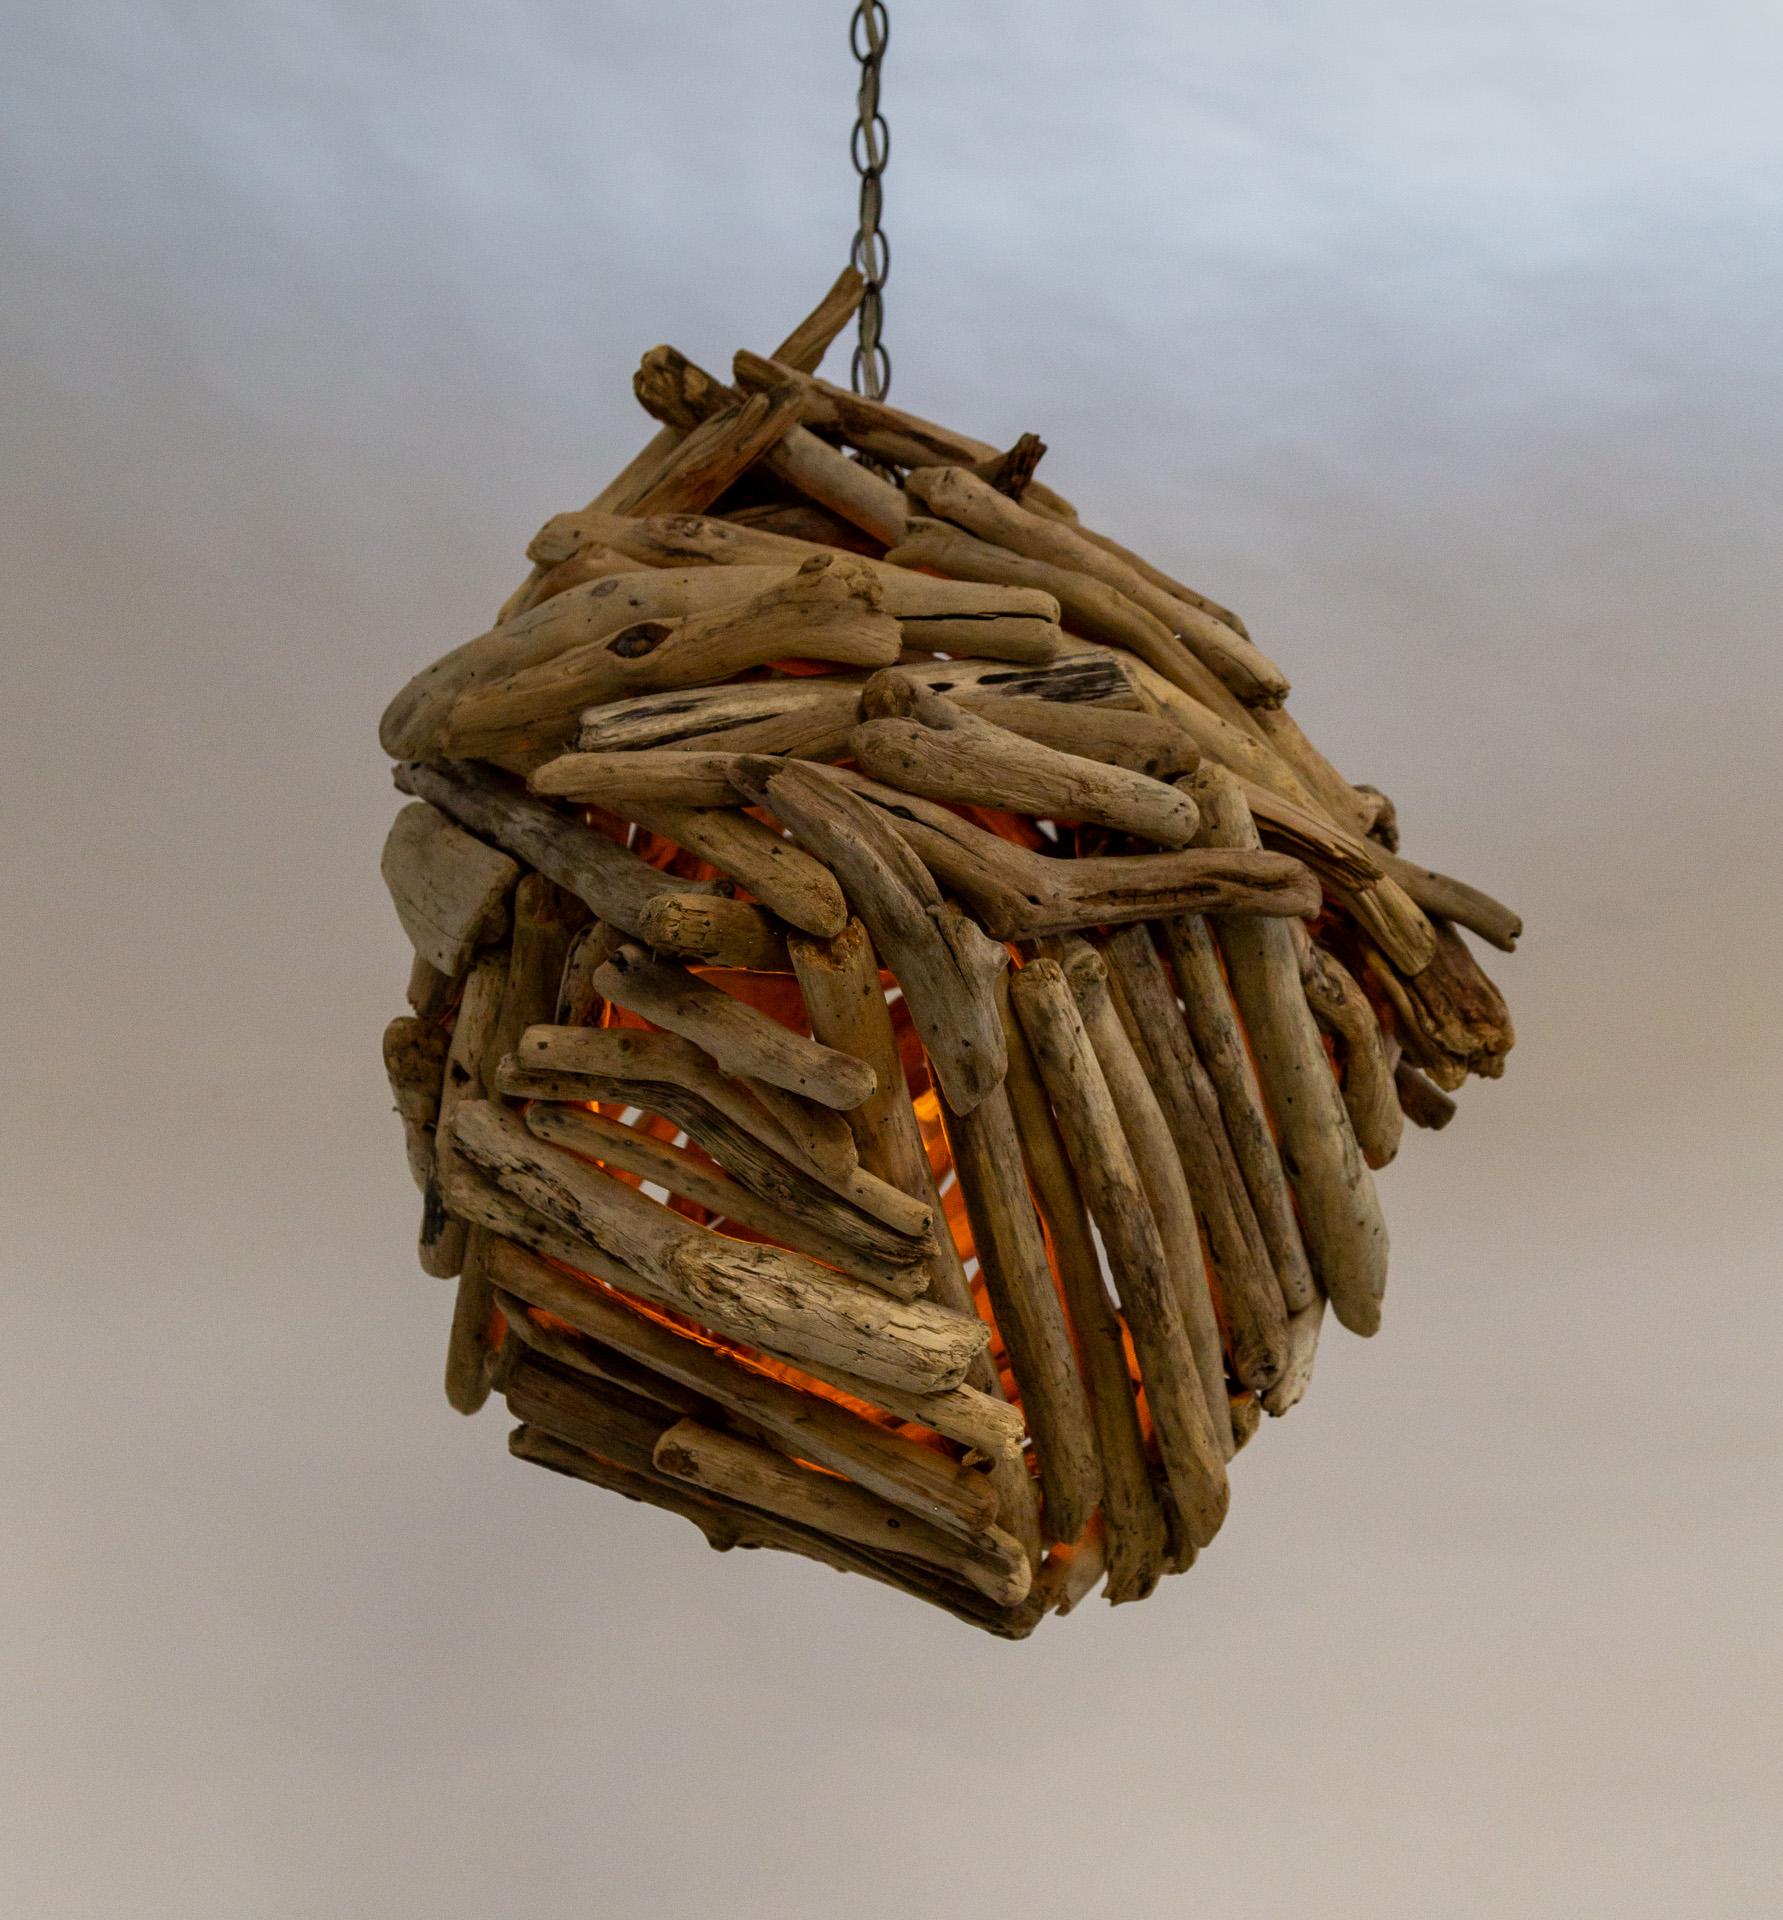 A large, one-of-a-kind pendant light comprised of pieces of driftwood meticulously placed into a bundle.  It has two medium base sockets suspended inside that can be accessed by a subtle break in the cluster on top.  Light can be seen from between